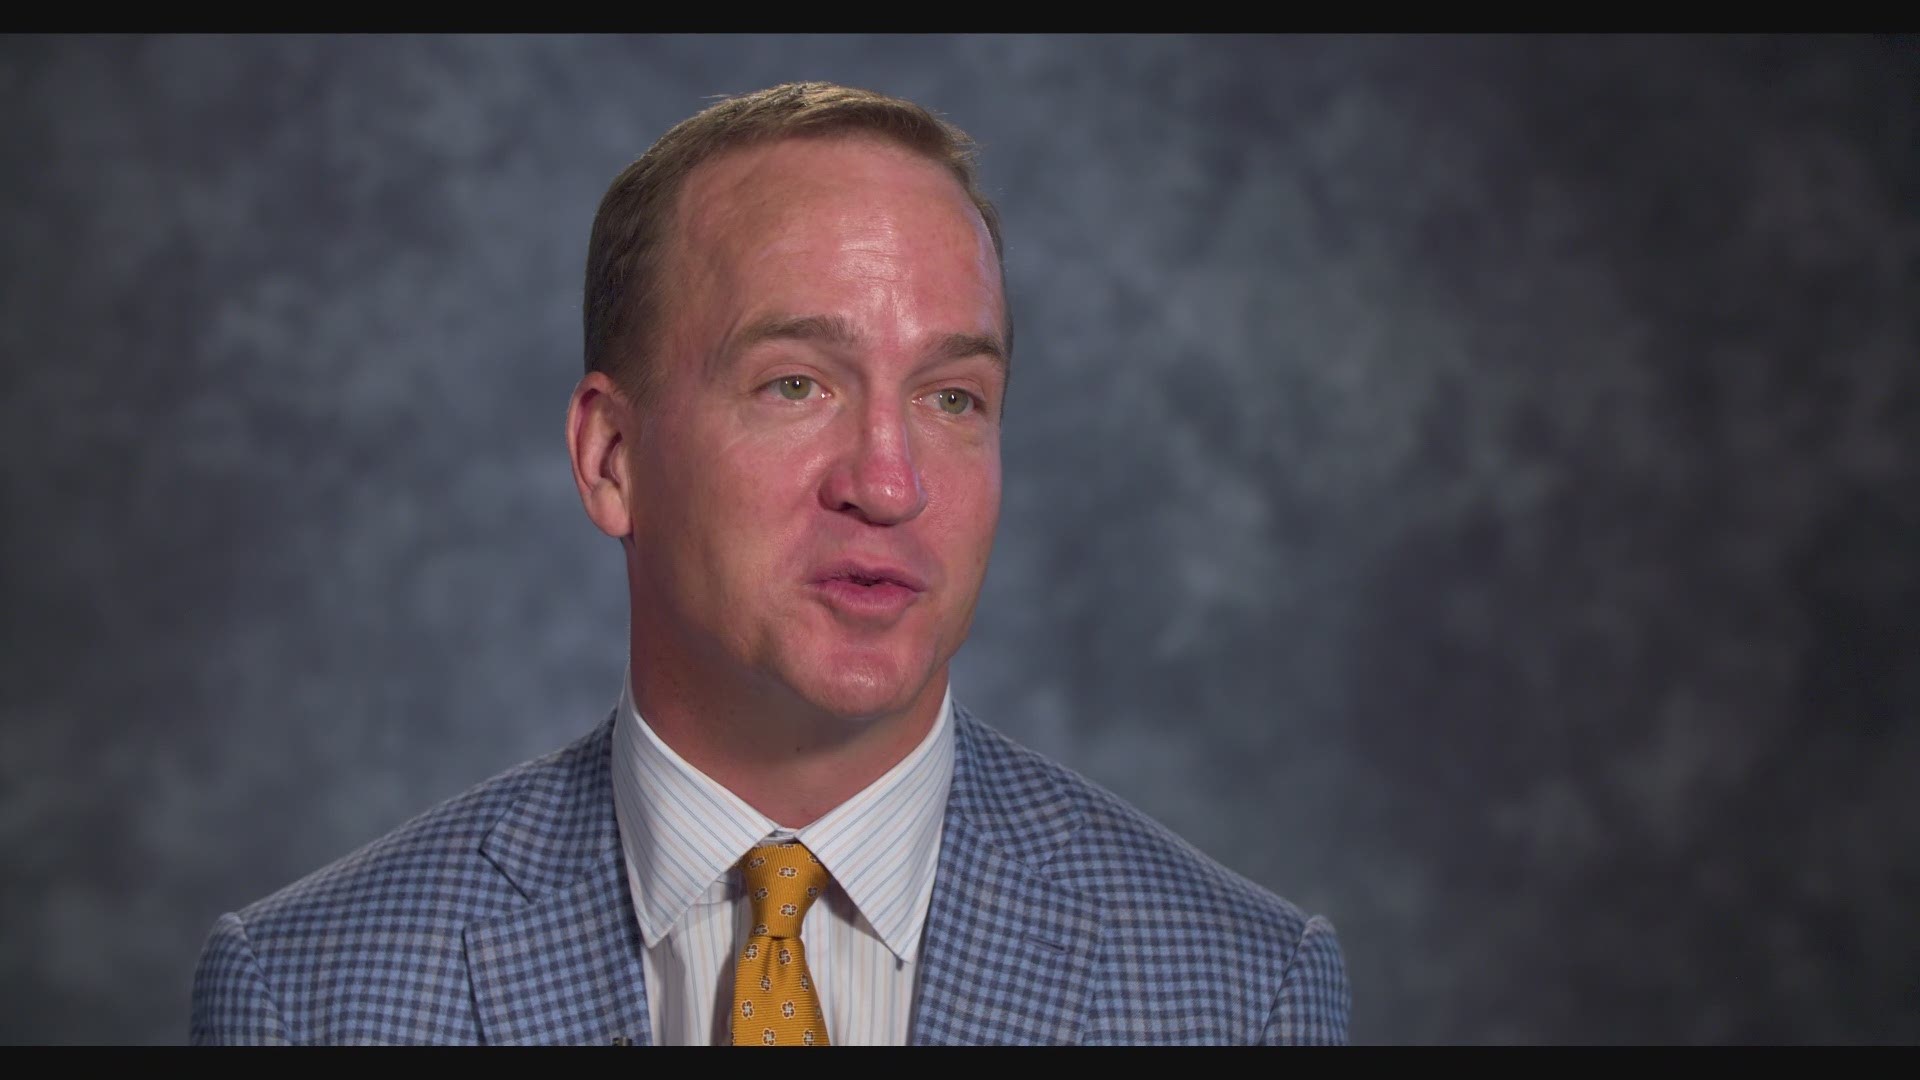 The night before Peyton Manning announced one of the biggest decisions of his life, the choice to stay at Tennessee for his senior year, he ate dinner at one of his favorite Knoxville spots, Litton's Market and Restaurant.